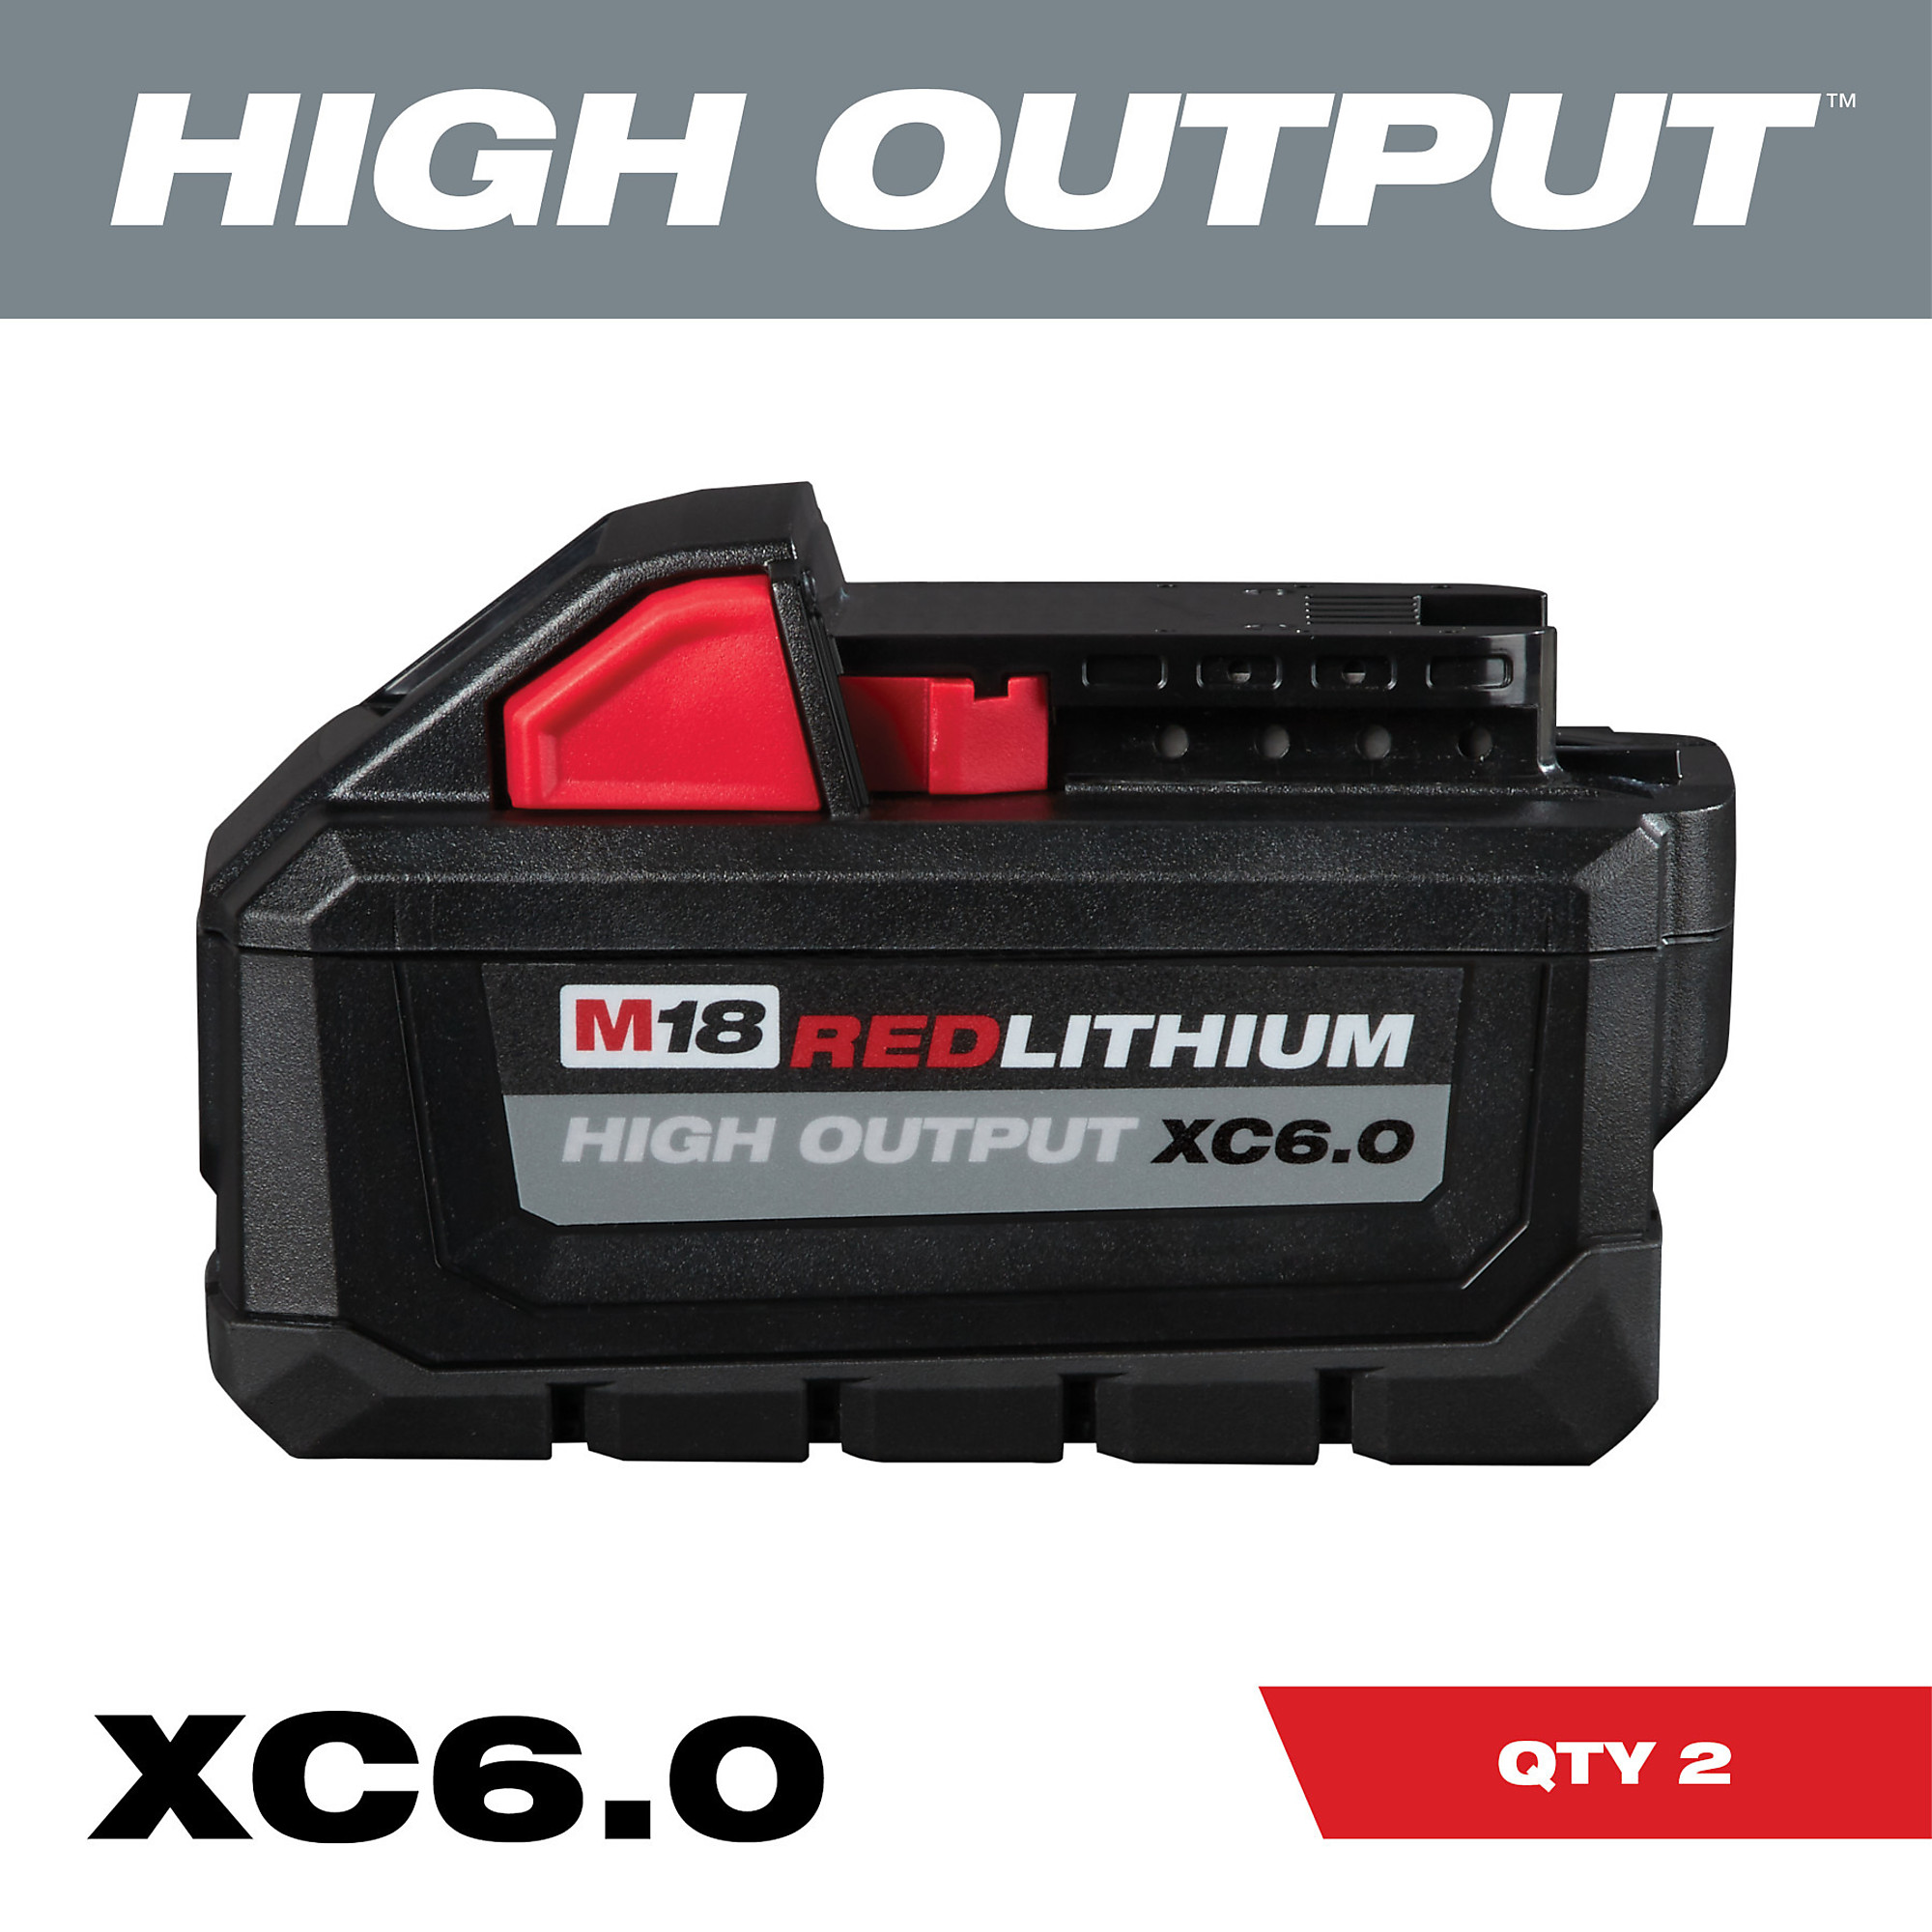 M18 REDLITHIUM High-Output XC6.0 Battery Pack, 2-Pack, 6.0Ah, Model - Milwaukee 48-11-1862